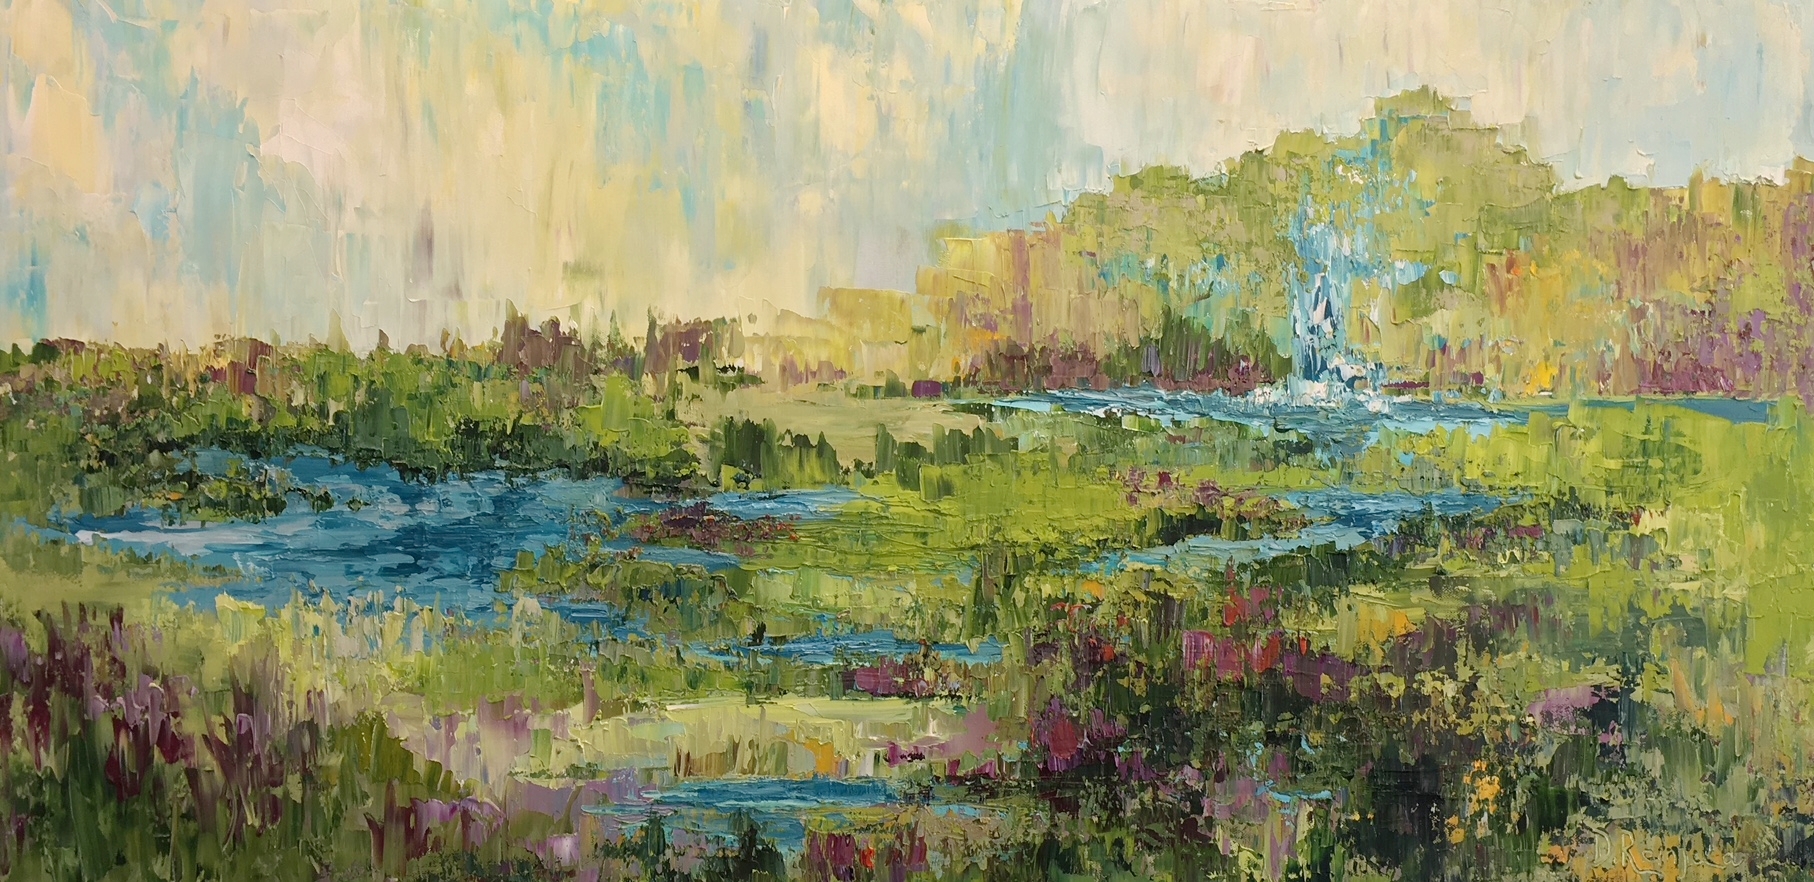 Tributary, oil on canvas, 24"x48" SOLD